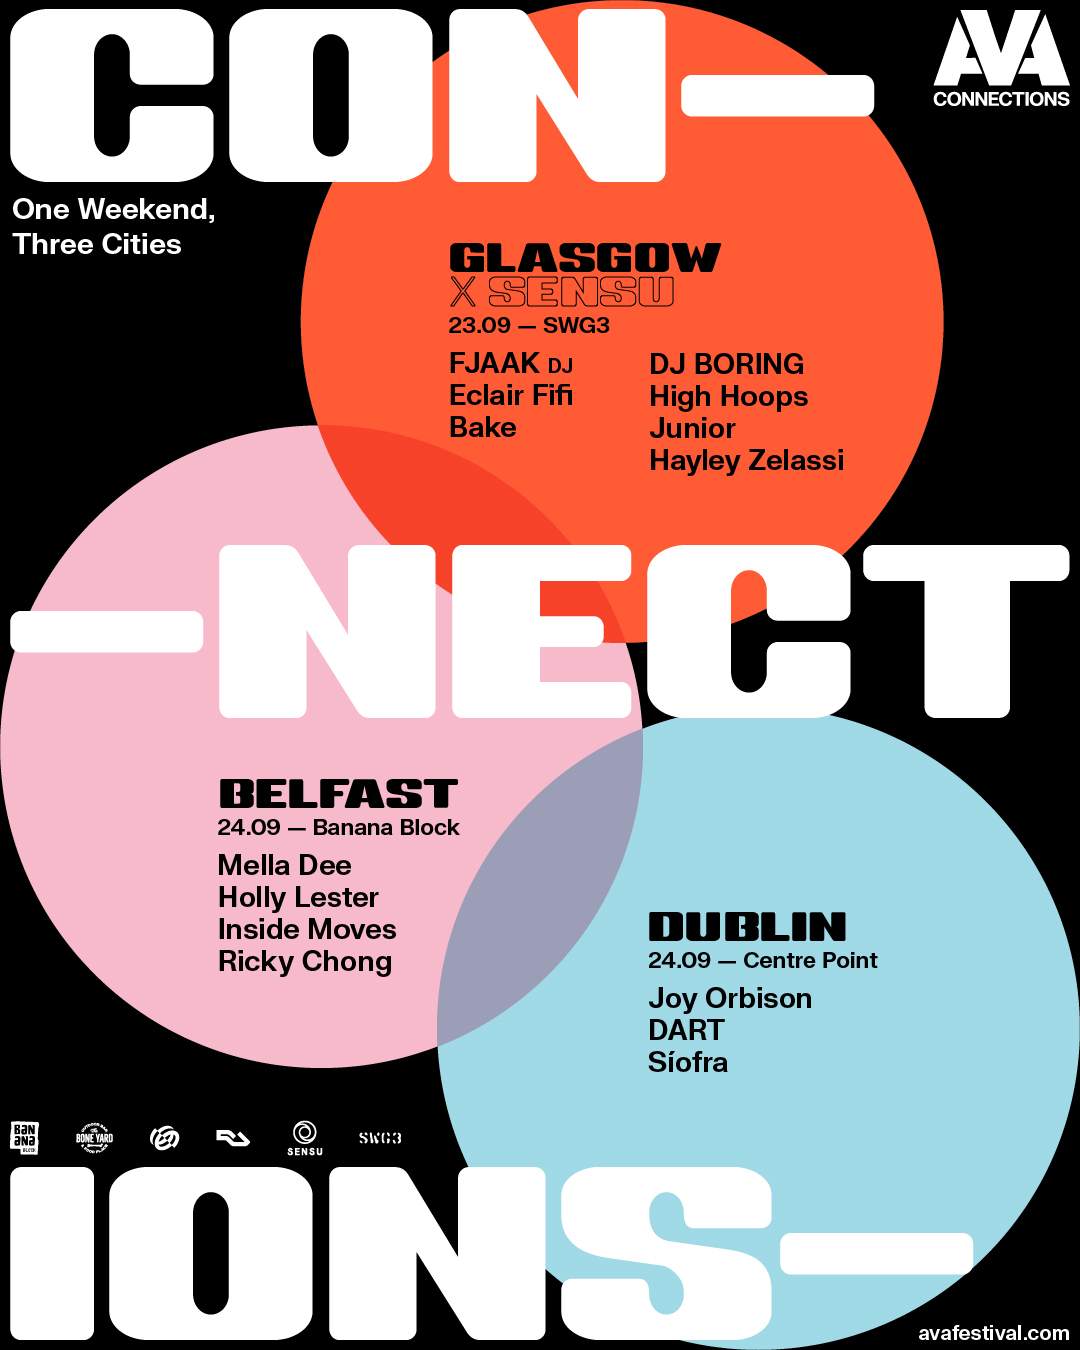 AVA Connections - Belfast Warehouse Party: Mella Dee, Holly Lester, Inside Moves, Ricky Chong - Página trasera